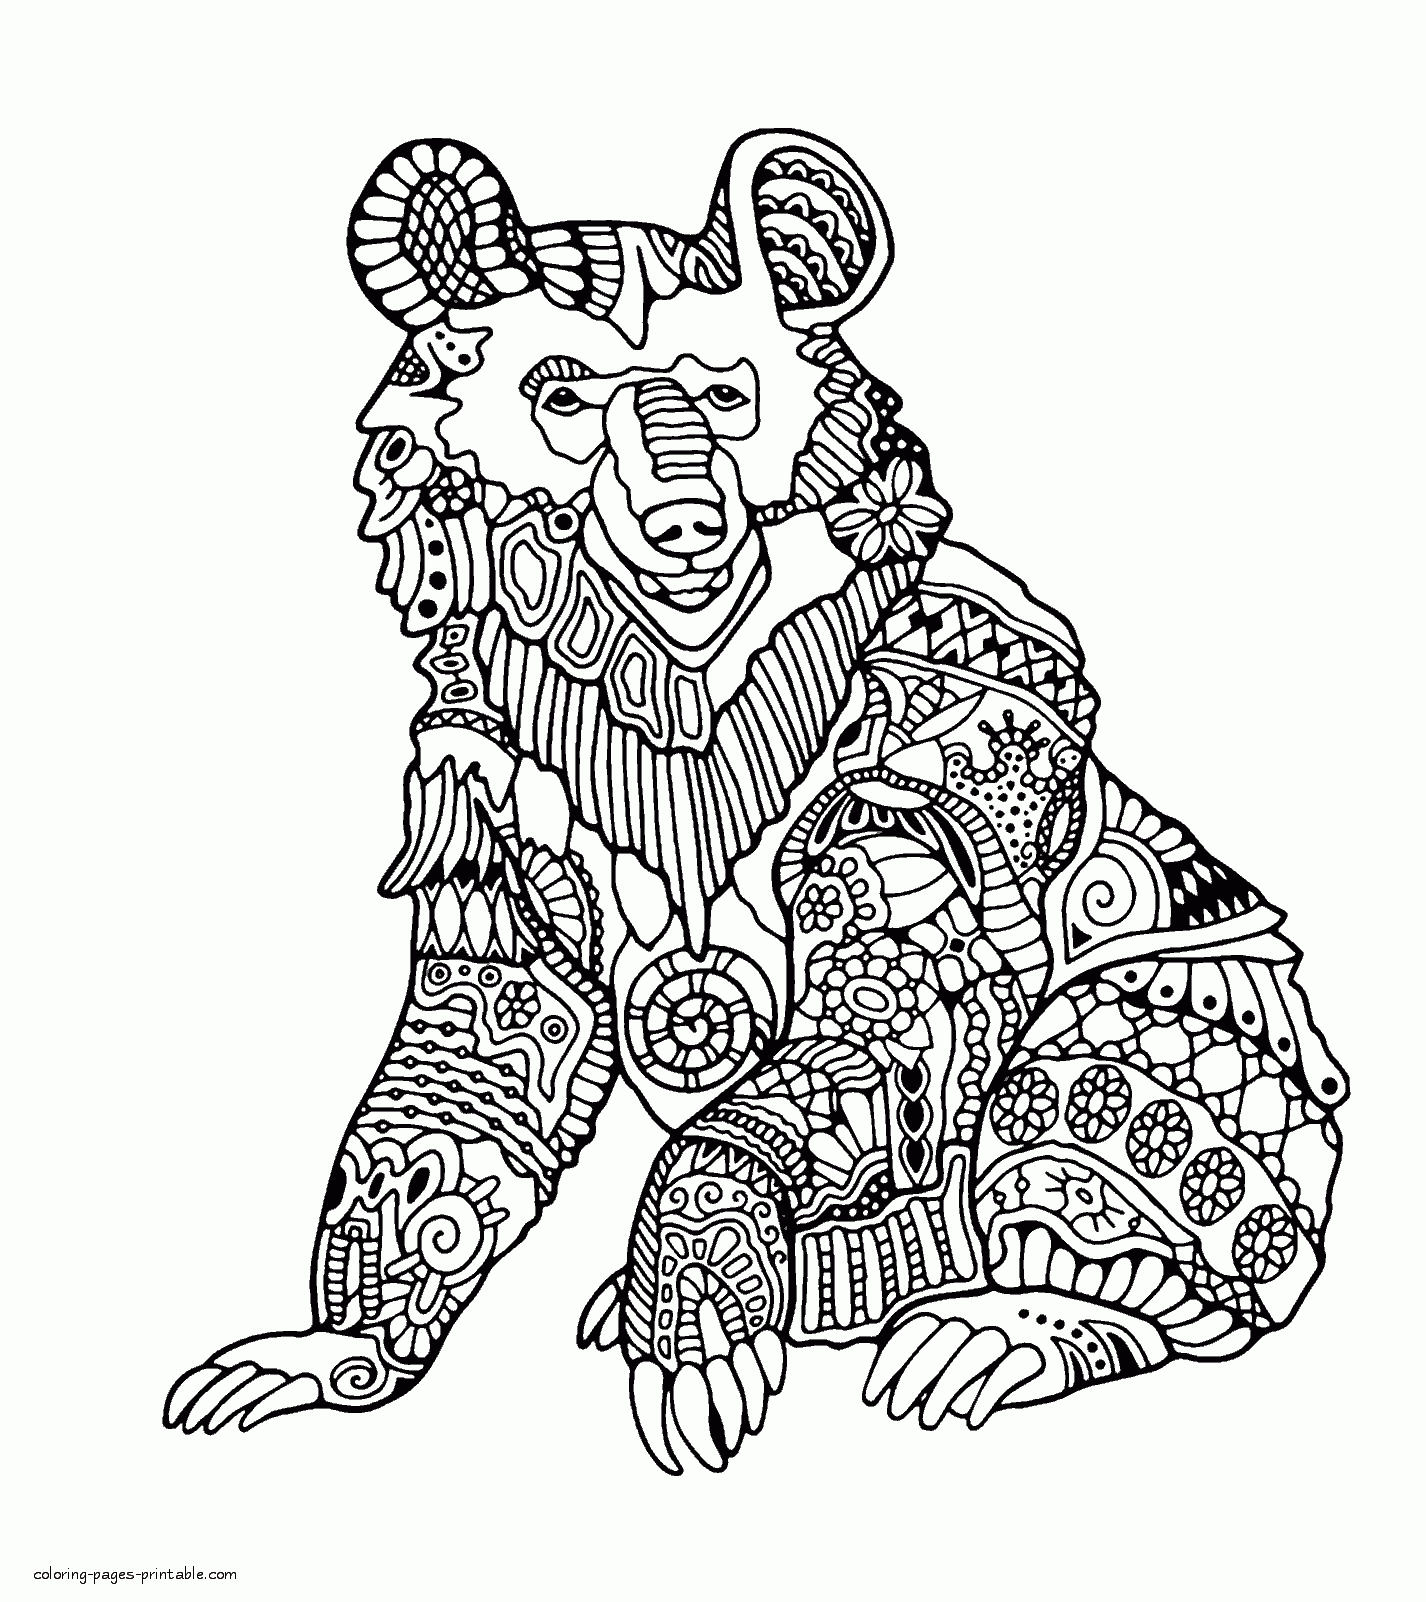 Bear Coloring Page For Adults || COLORING-PAGES-PRINTABLE.COM